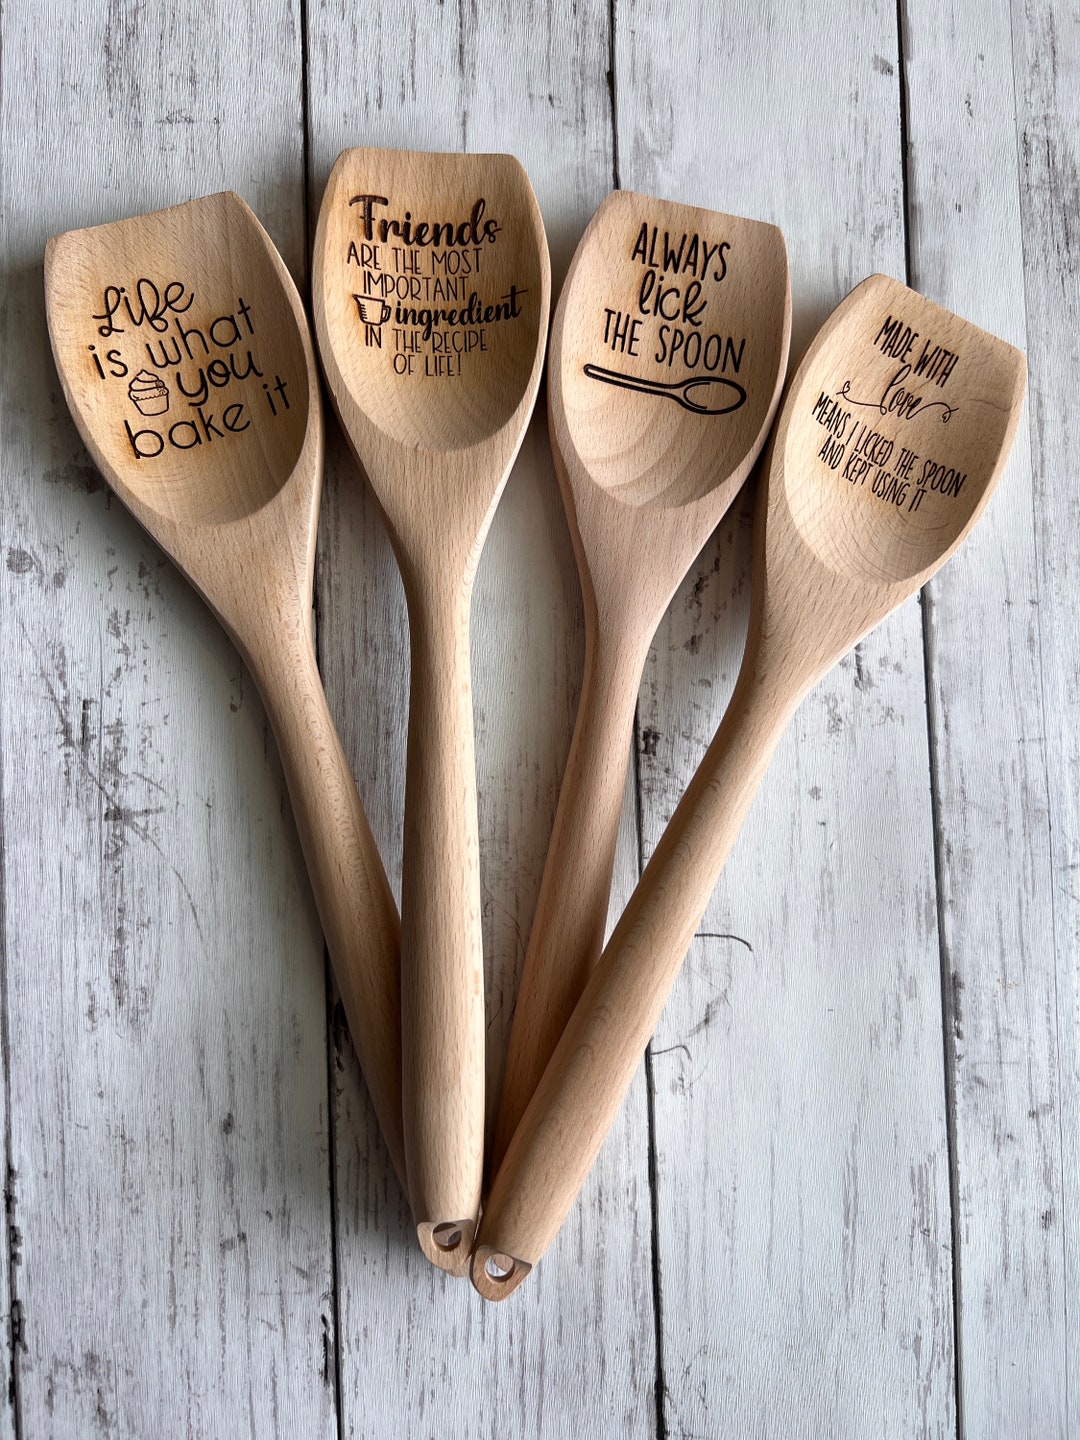 Wood Burning Spoons with Torch Paste, Soooo cool! SVG + Torch porch +  reusable stencils = Custom Wooden Spoons 🤯   By So Fontsy